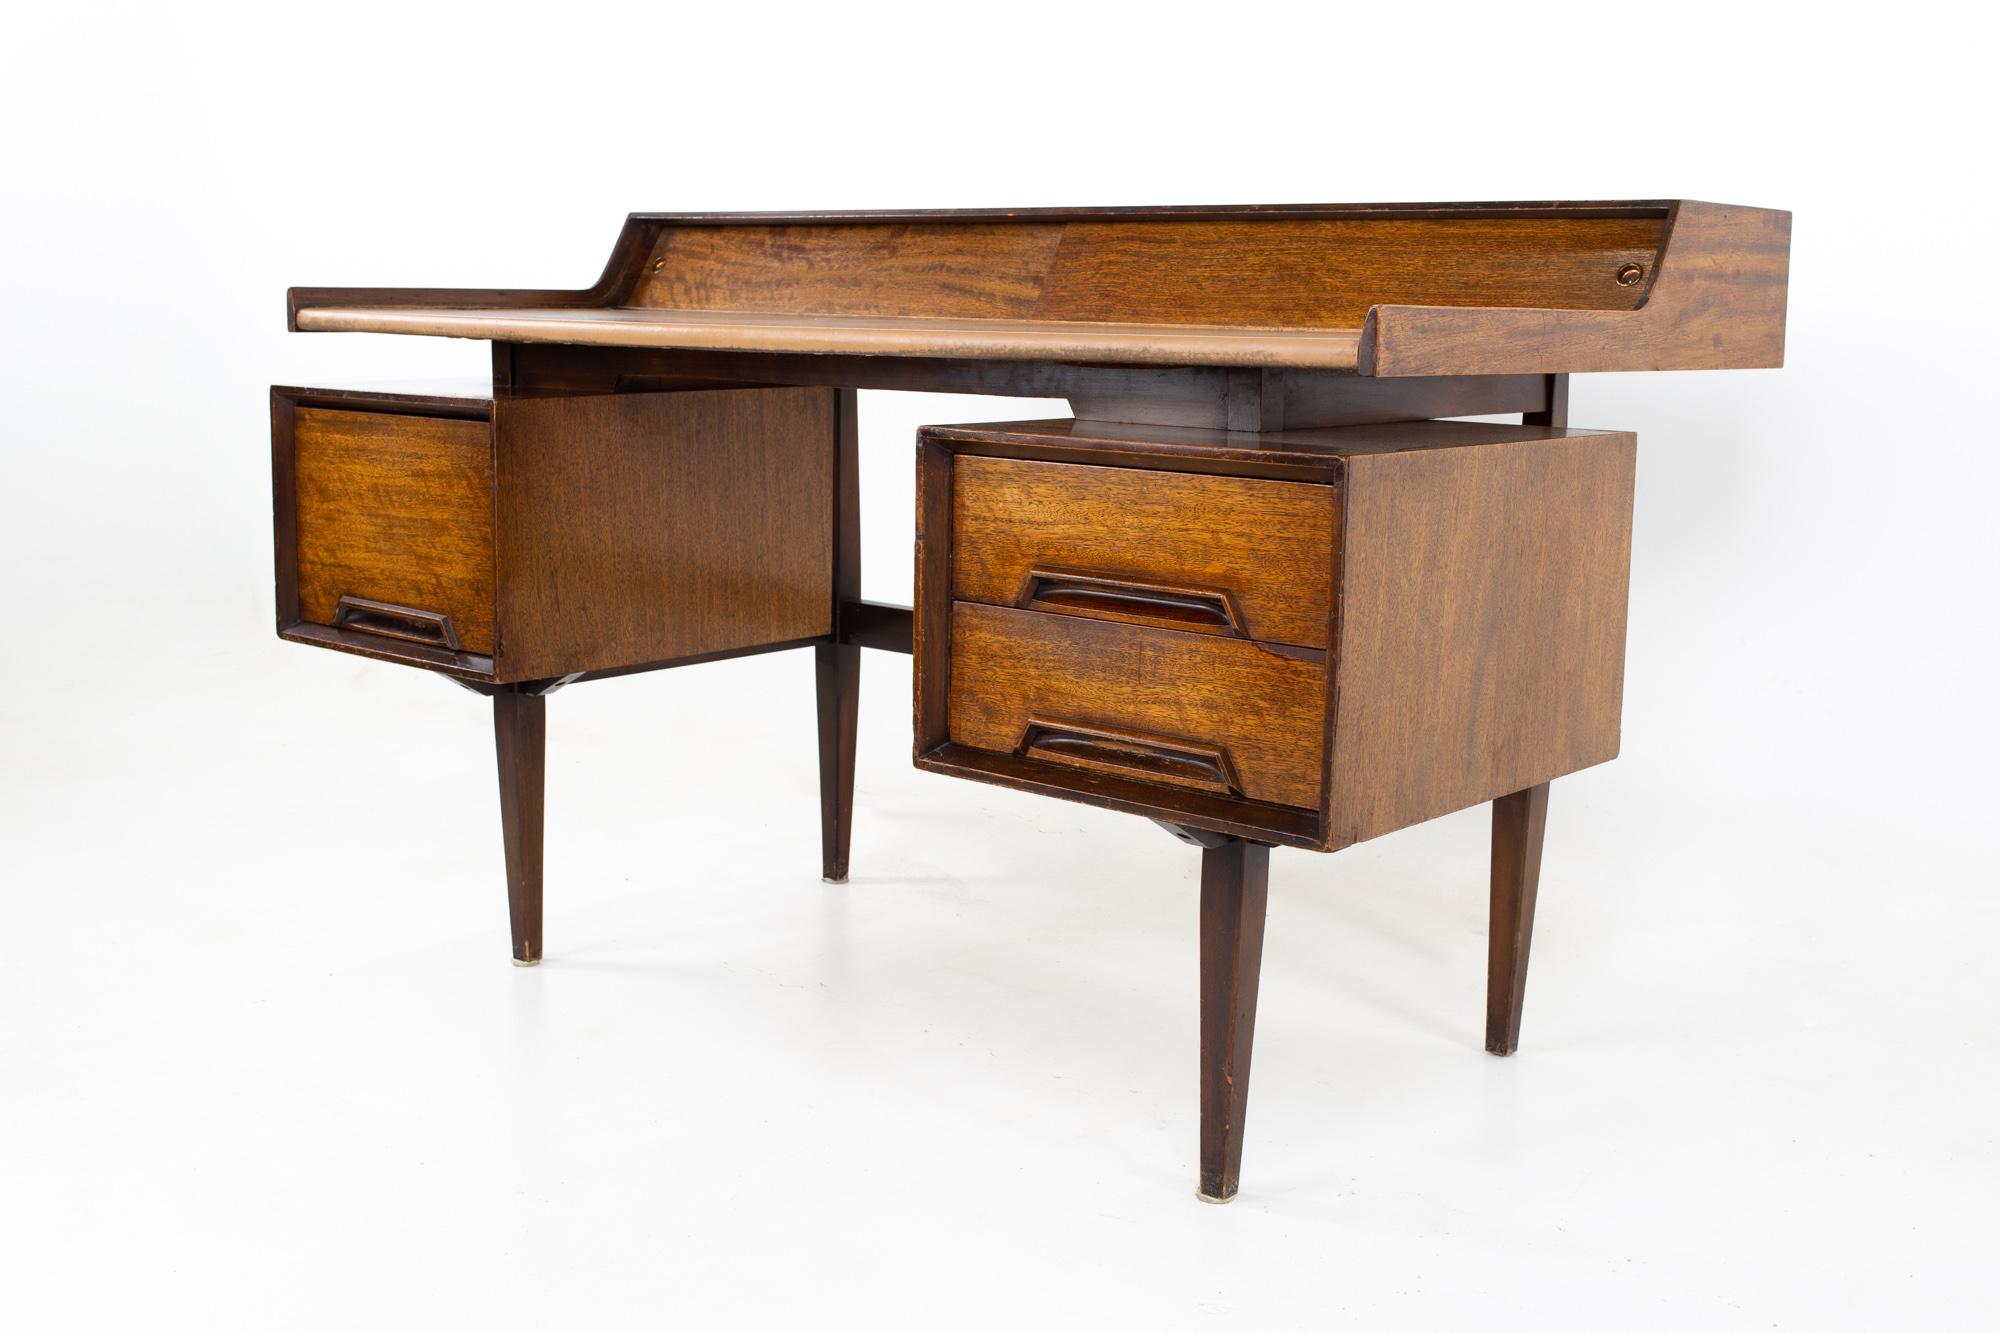 Milo Baughman for Drexel mid century walnut floating double sided desk
Desk measures: 56 wide x 31.5 deep x 34.25 inches high

All pieces of furniture can be had in what we call restored vintage condition. That means the piece is restored upon